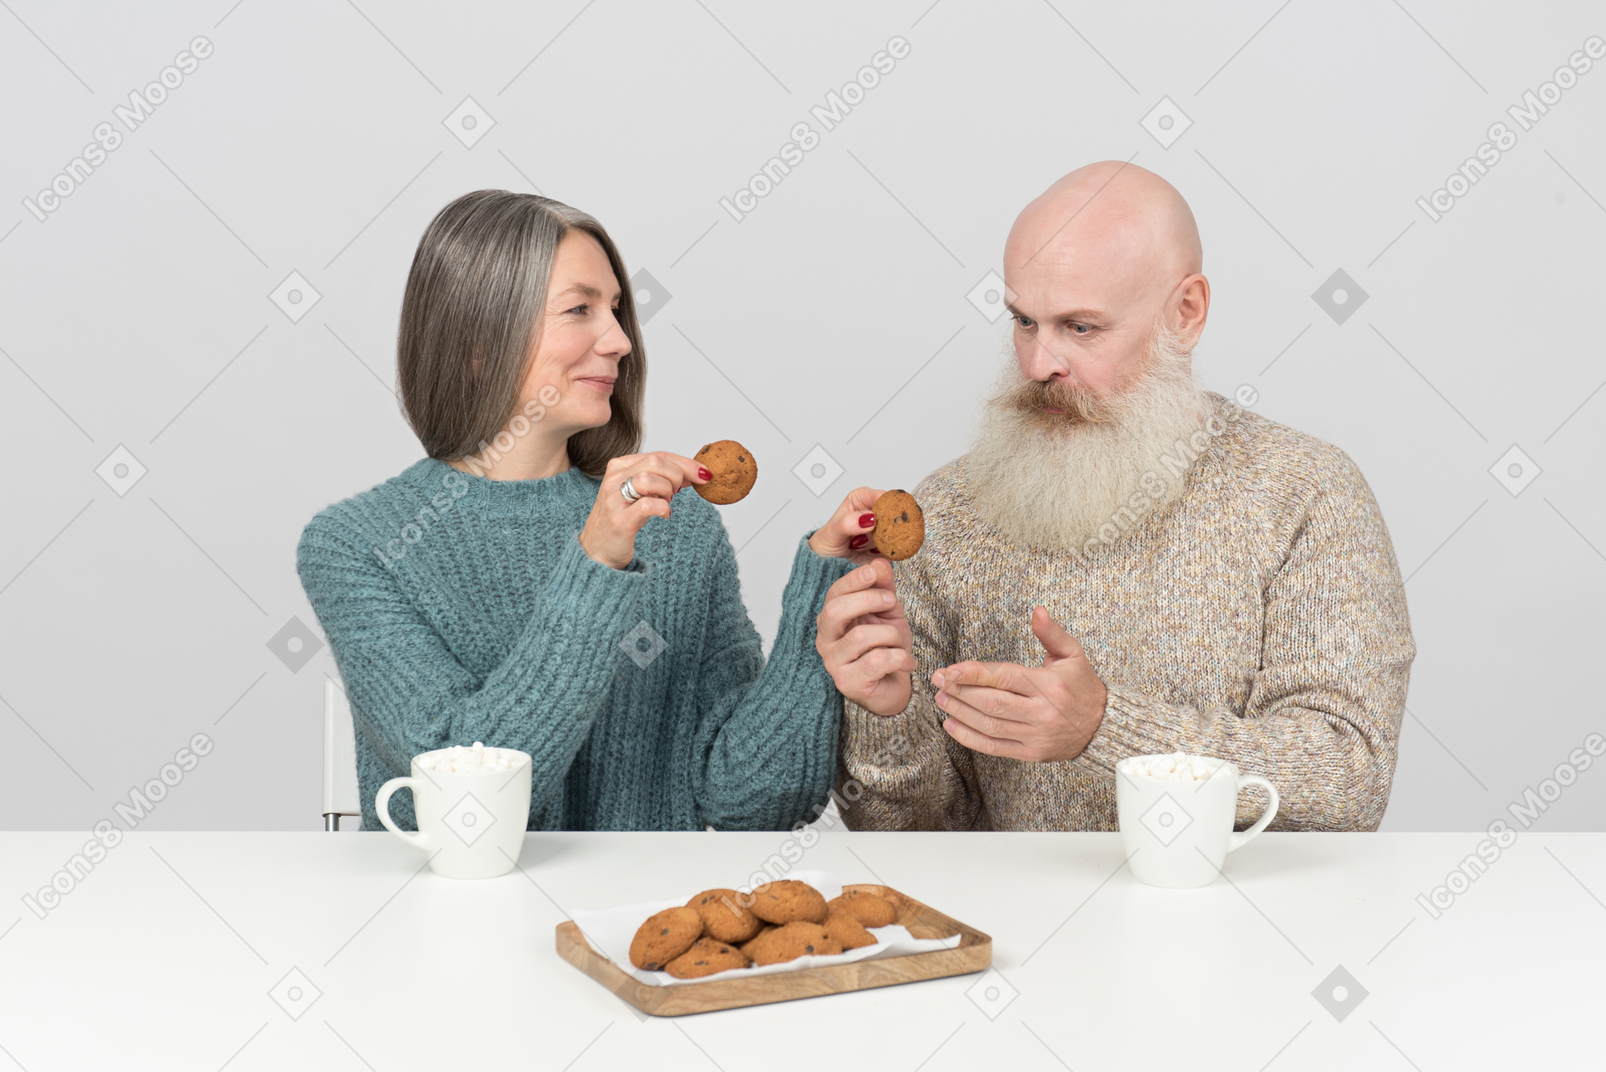 Elder woman giving one of two cookies she's holding to elder man